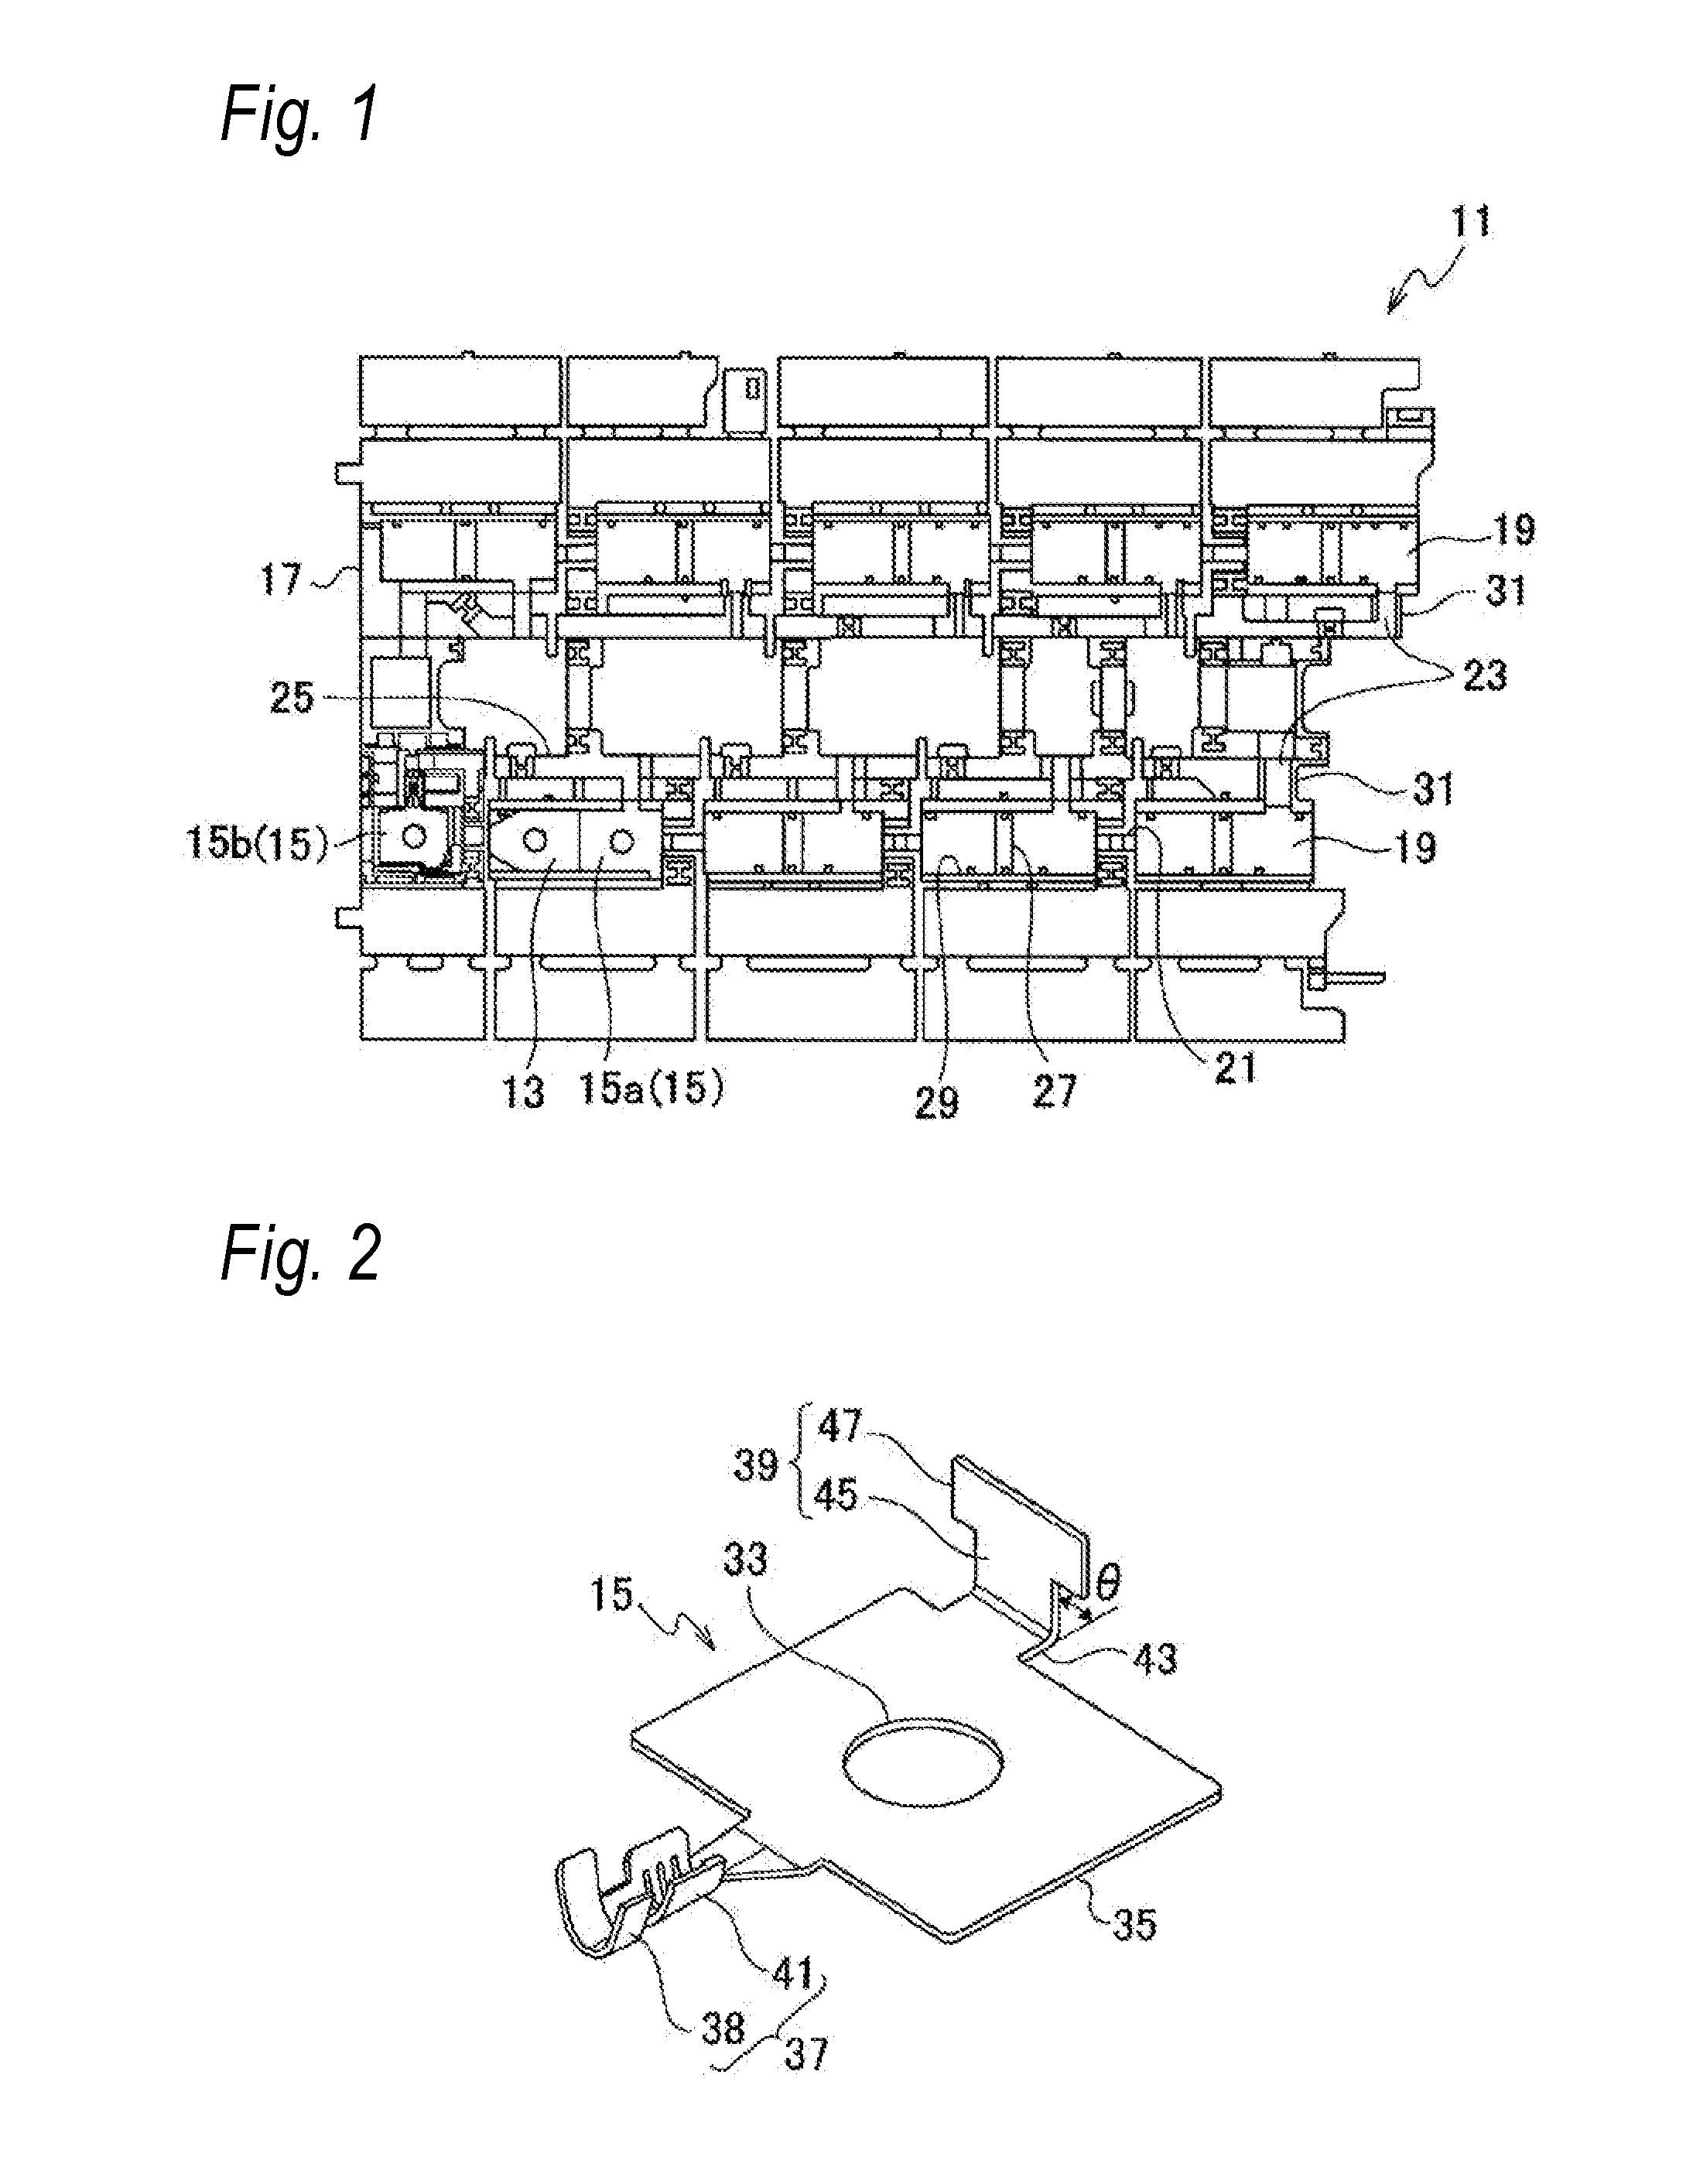 Structure for holding voltage detecting terminal